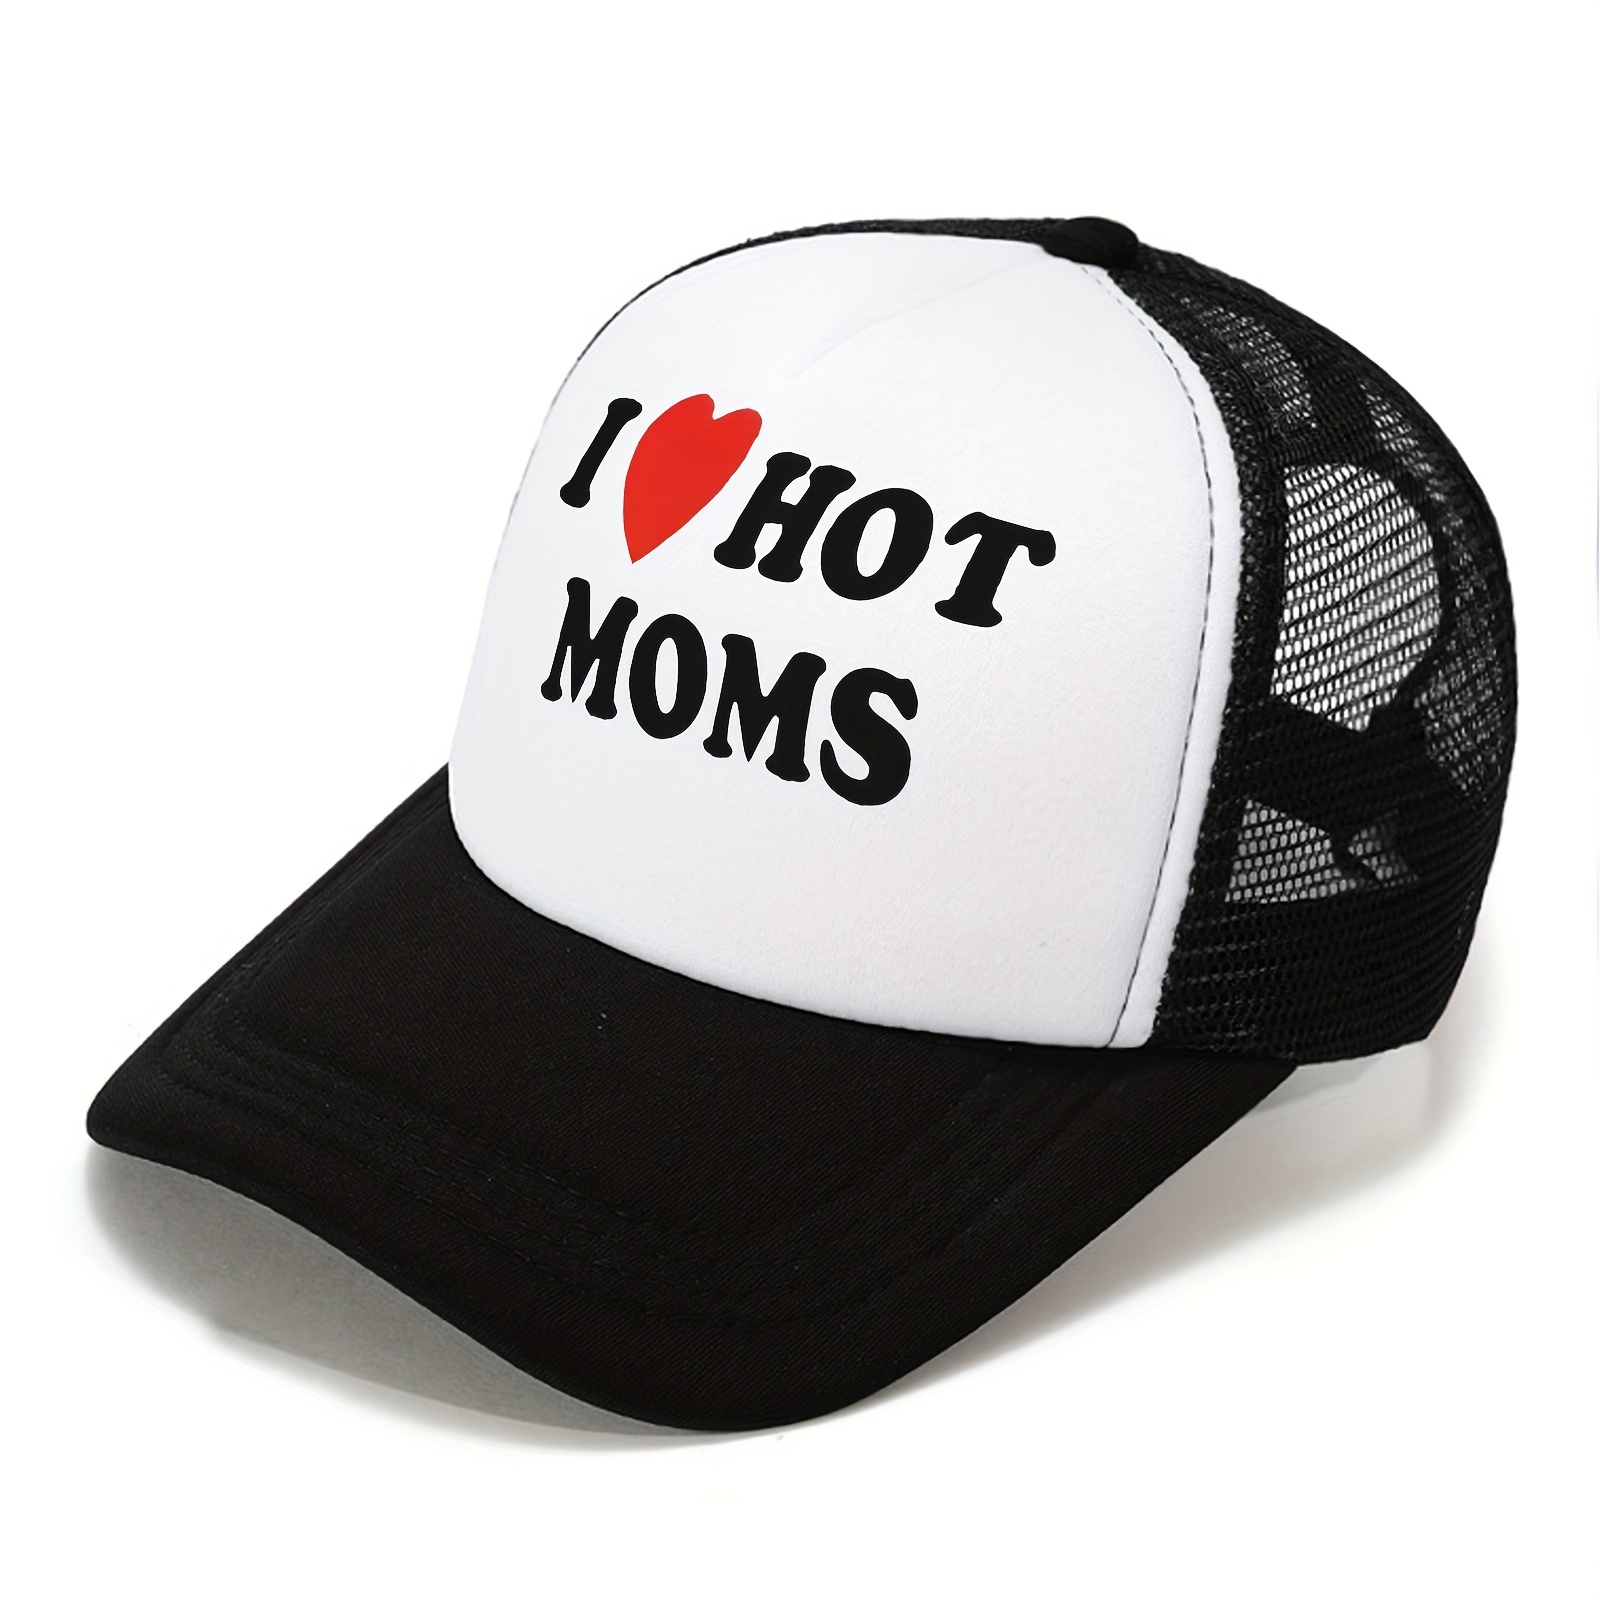 

1pc I Love Hot Moms Trucker Hat - Adjustable Baseball For Women - Funny Novelty Gift For Outdoor Sports And Fishing